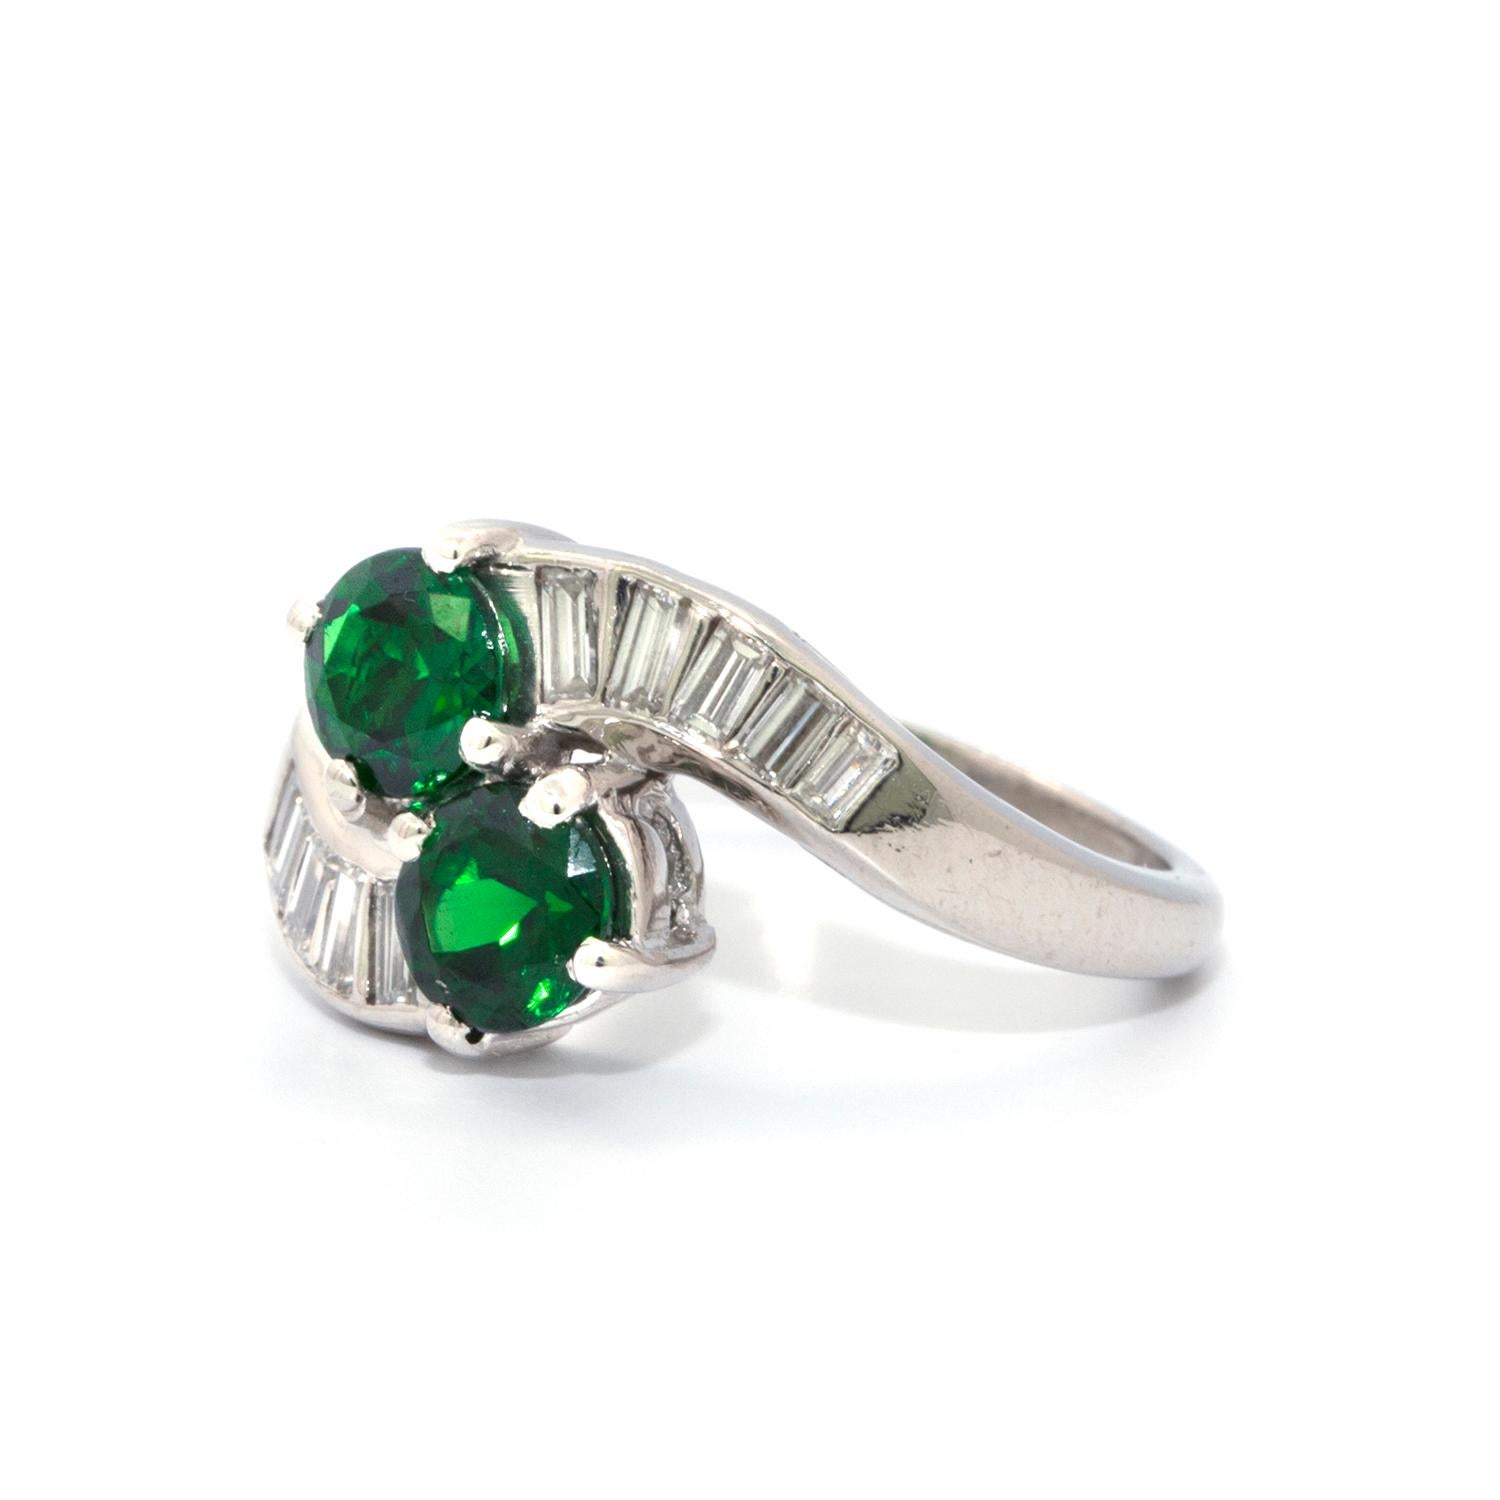 2 matching round Tsavorite Garnets with a total weight of 1.42 cts. They are accented by 10 baguette shaped diamonds that weigh 0.50cts in total. These gems are beautifully set in a stunning platinum wrap-a-round Estate ring. Size 5 3/4  6 grams    